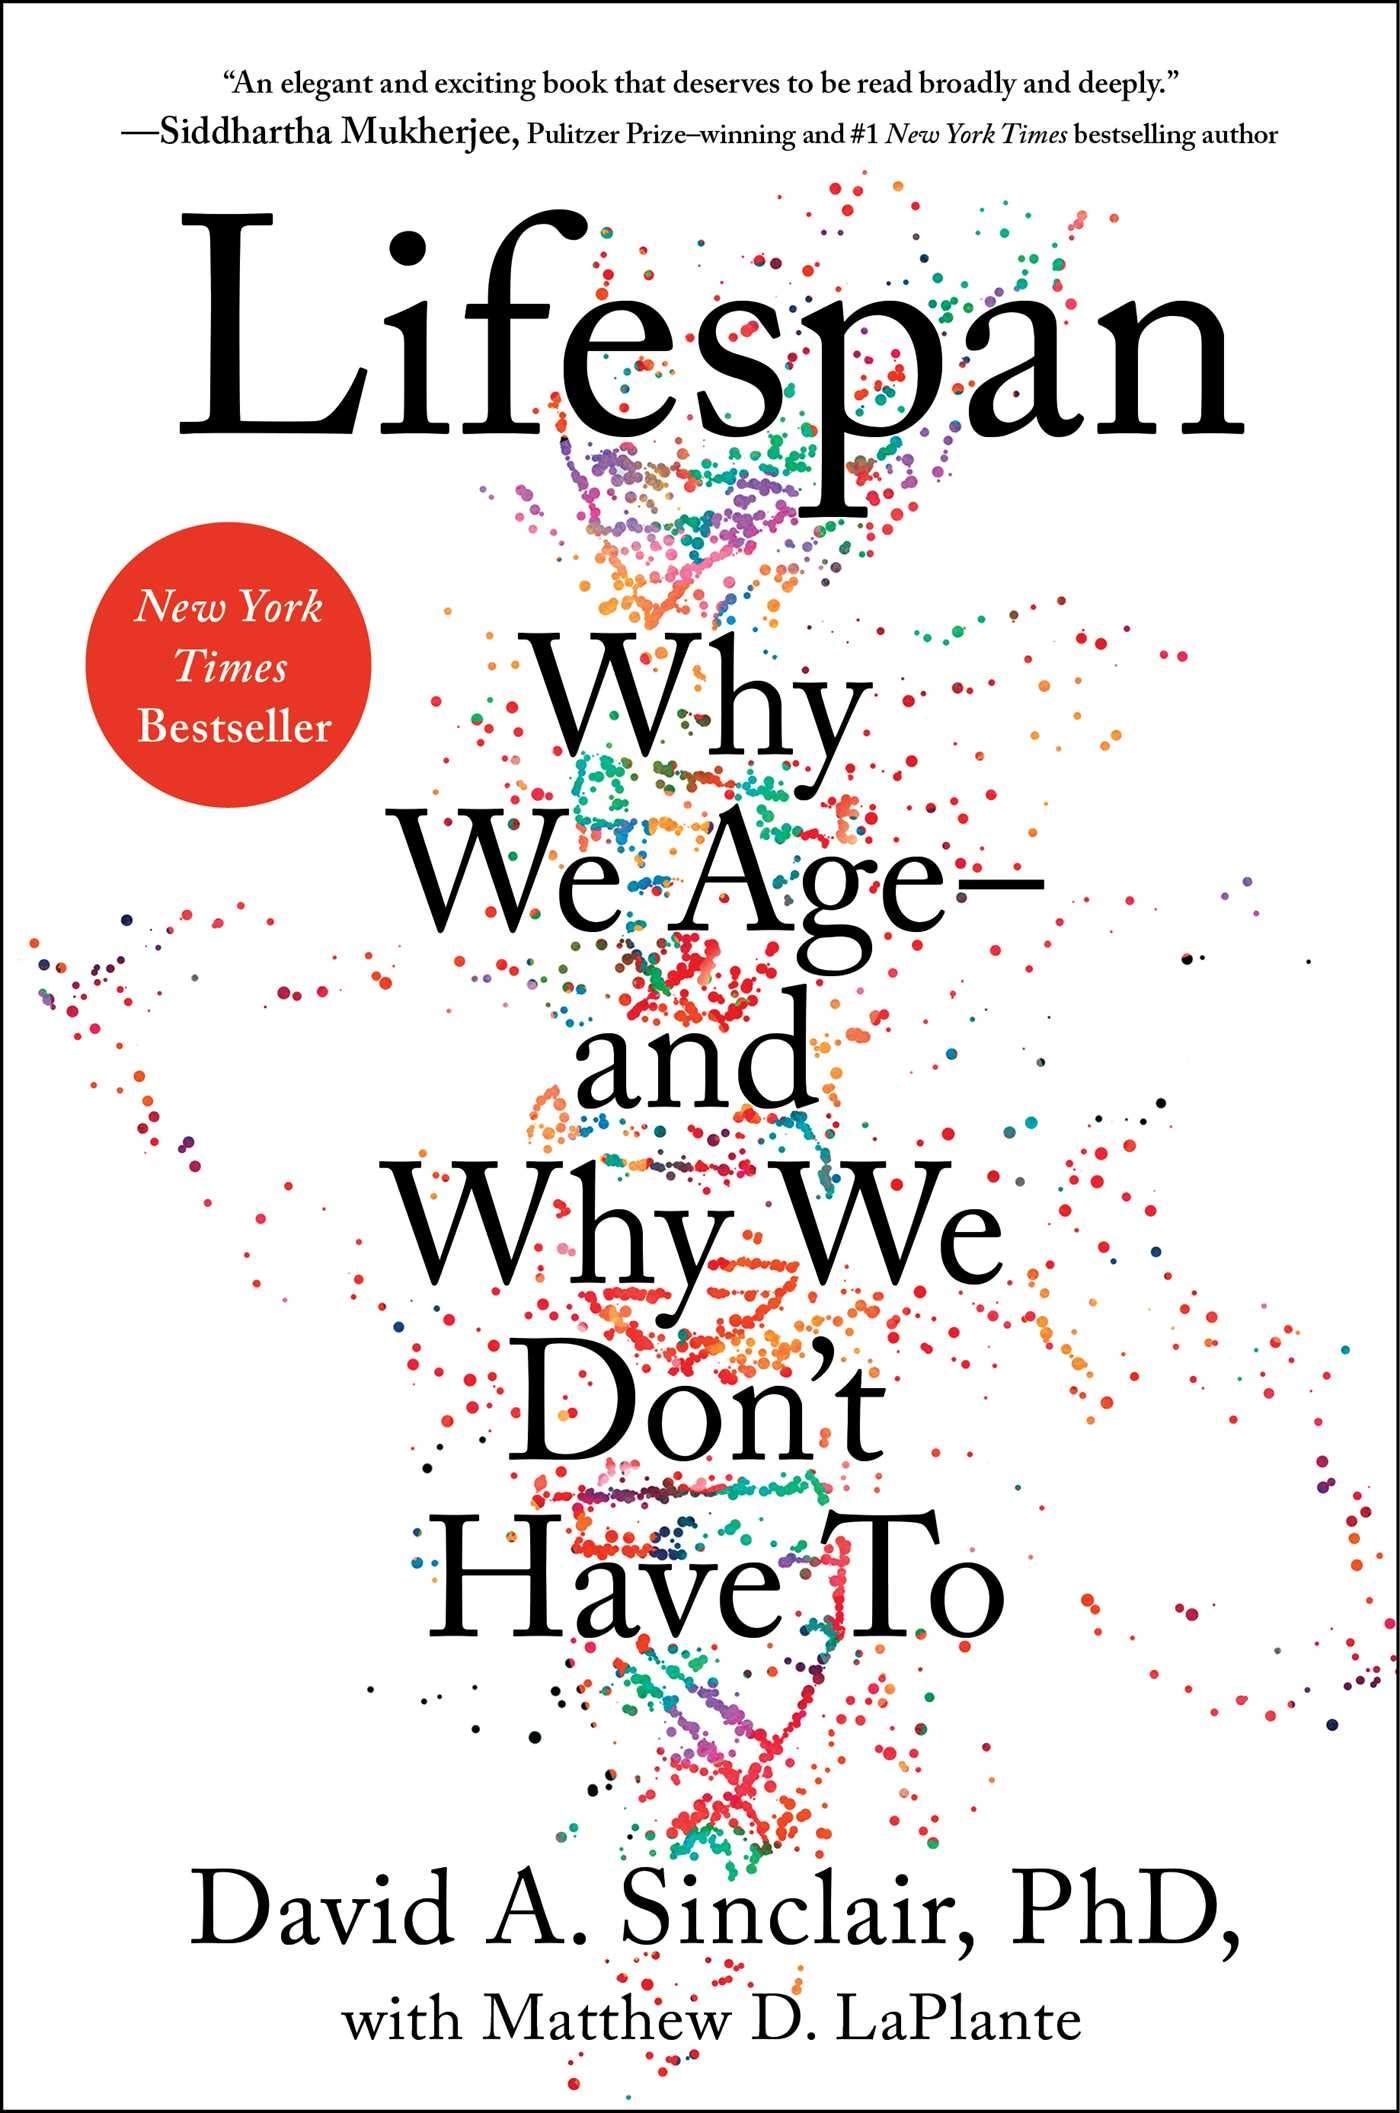 Lifespan: Why We Age and Why We Don't Have To